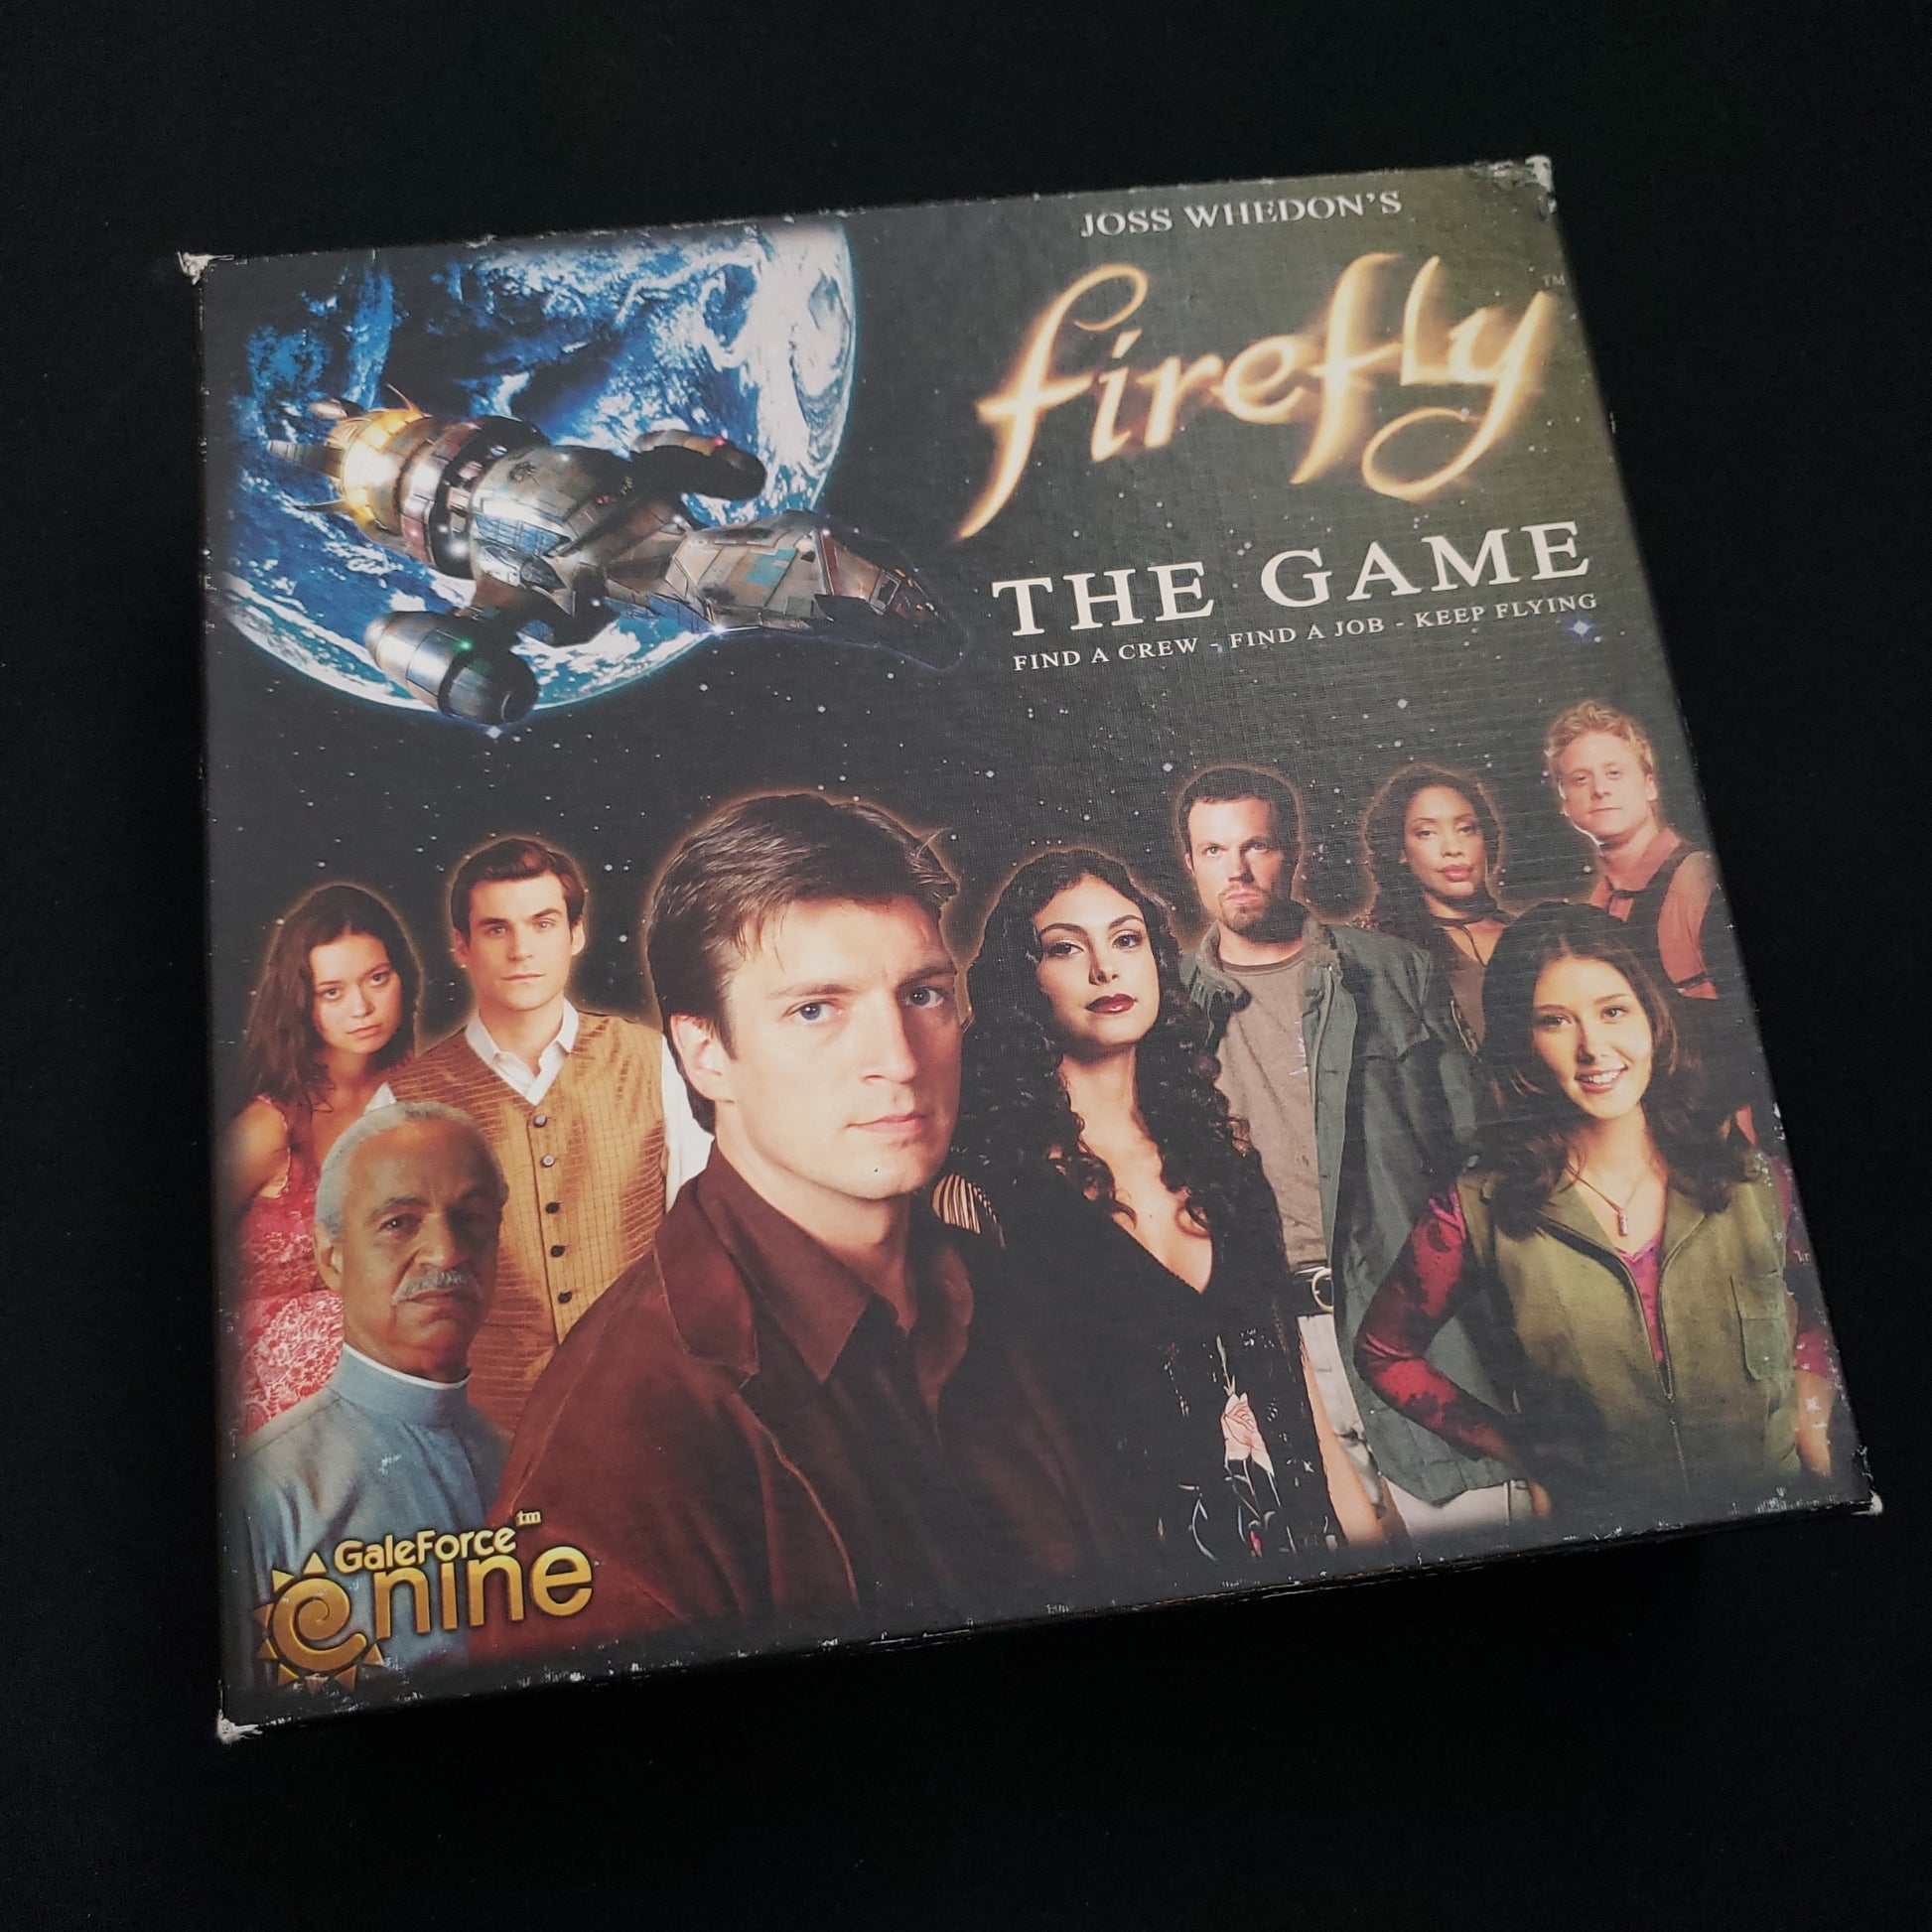 Image shows the front cover of the box of the Firefly board game